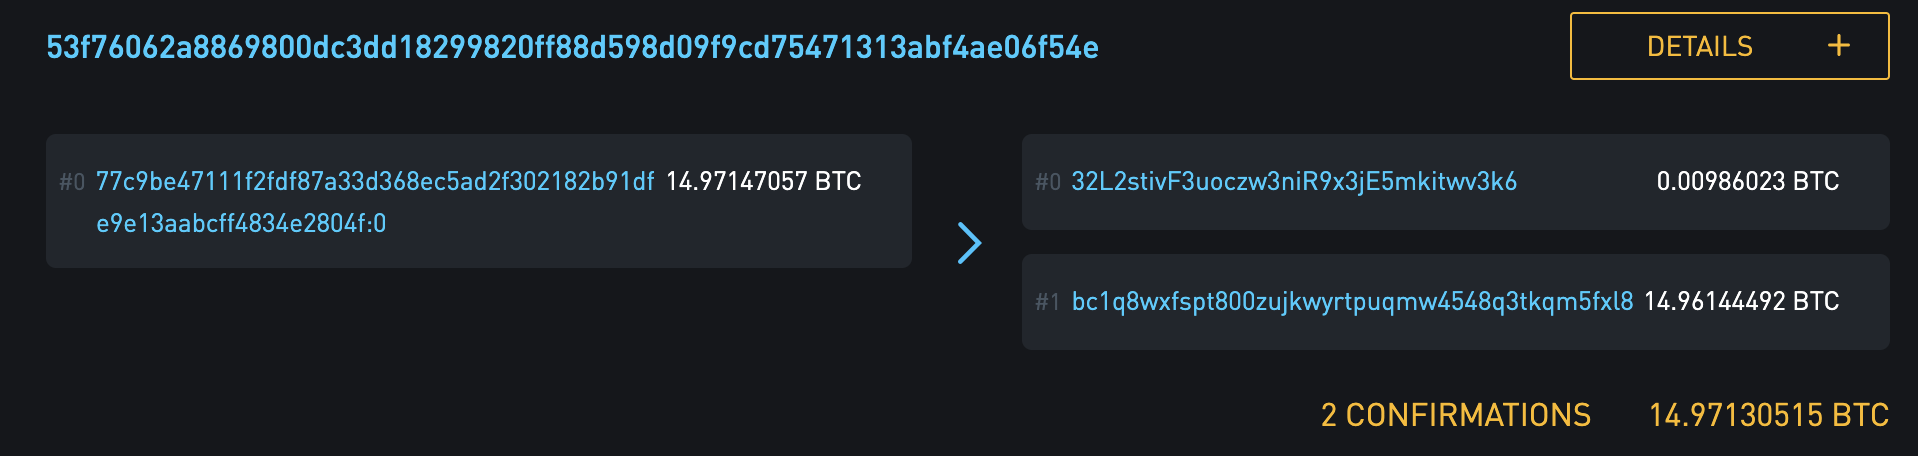 Coinbase uses bech32 for their change addresses, even when the send is going to non bech32.
